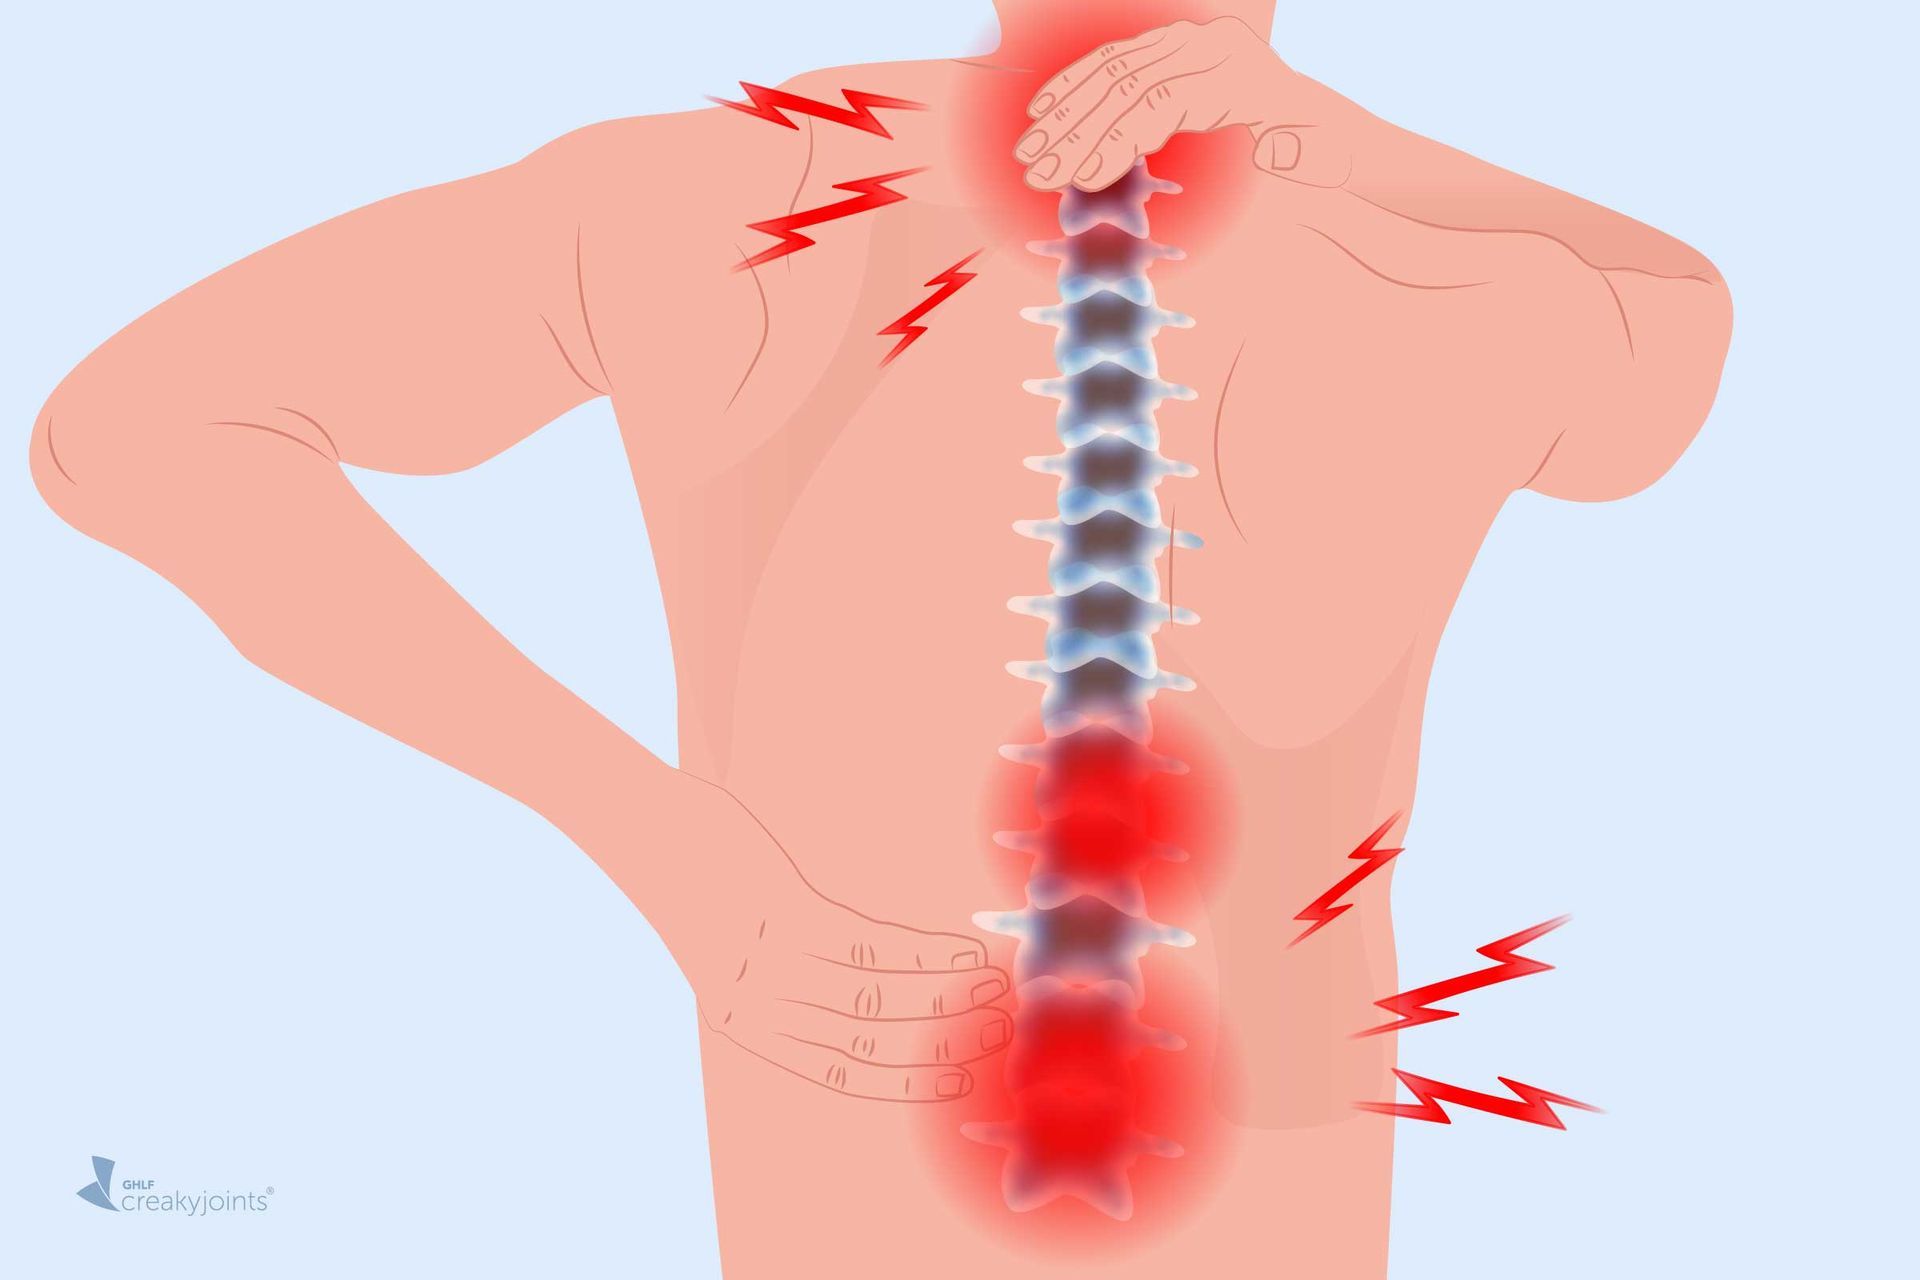 Diagnosing Spinal Issues